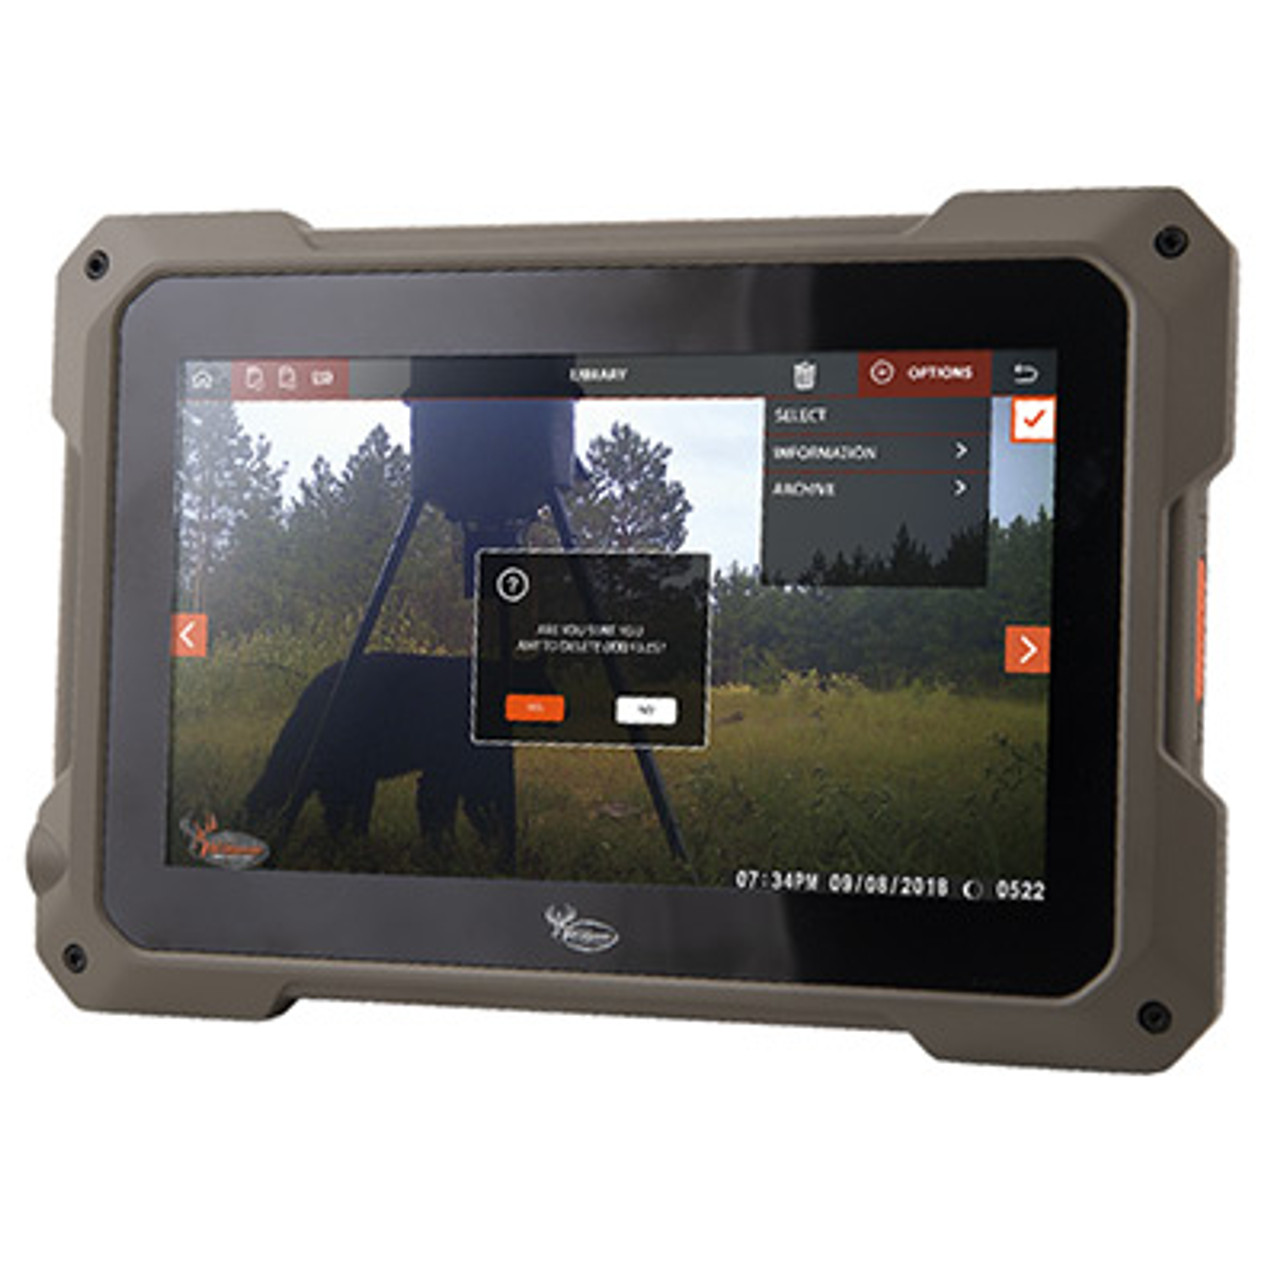 Trail Pad Tablet VU70 Dual SD Card Reader by Wildgame Innovations